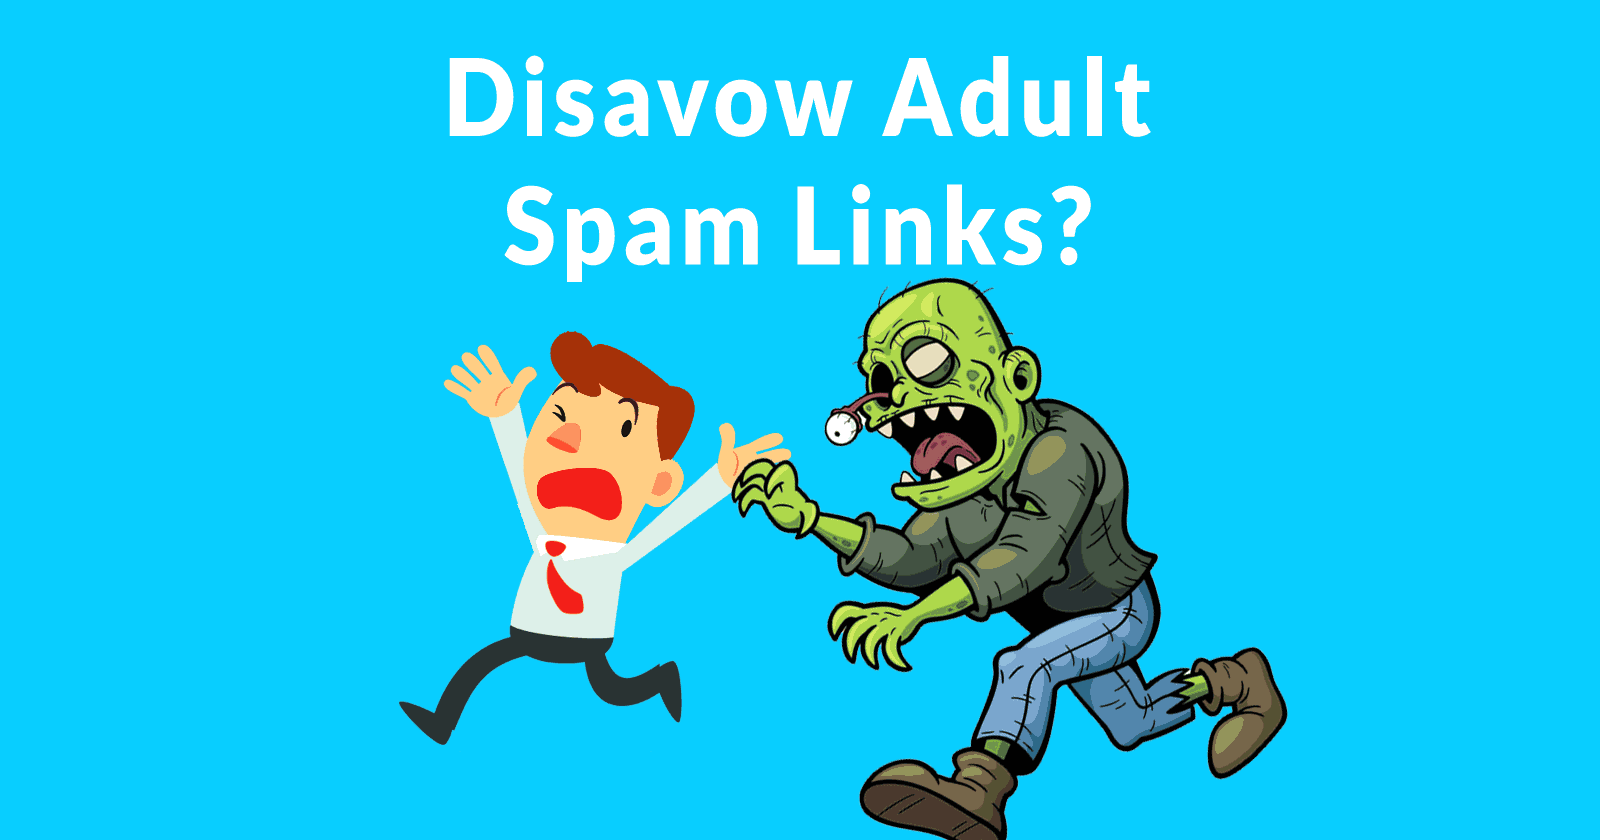 Should you disavow adult spam links?